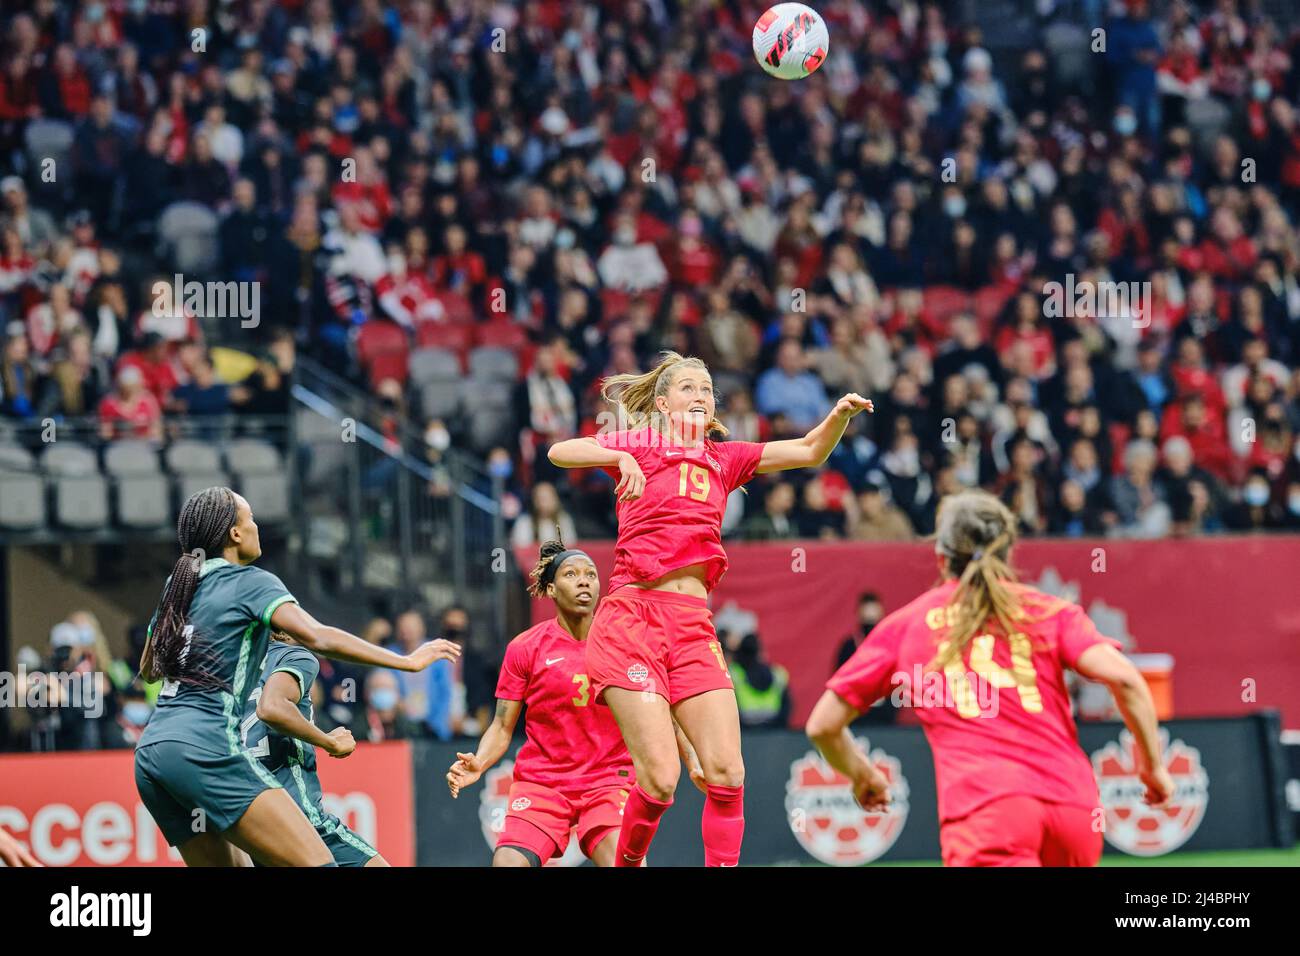 Vancouver, British Columbia, Canada. 8th April, 2022. Jordyn Huitema of Team Canada during the first Canada Soccer’s Women’s National Team Celebration Stock Photo